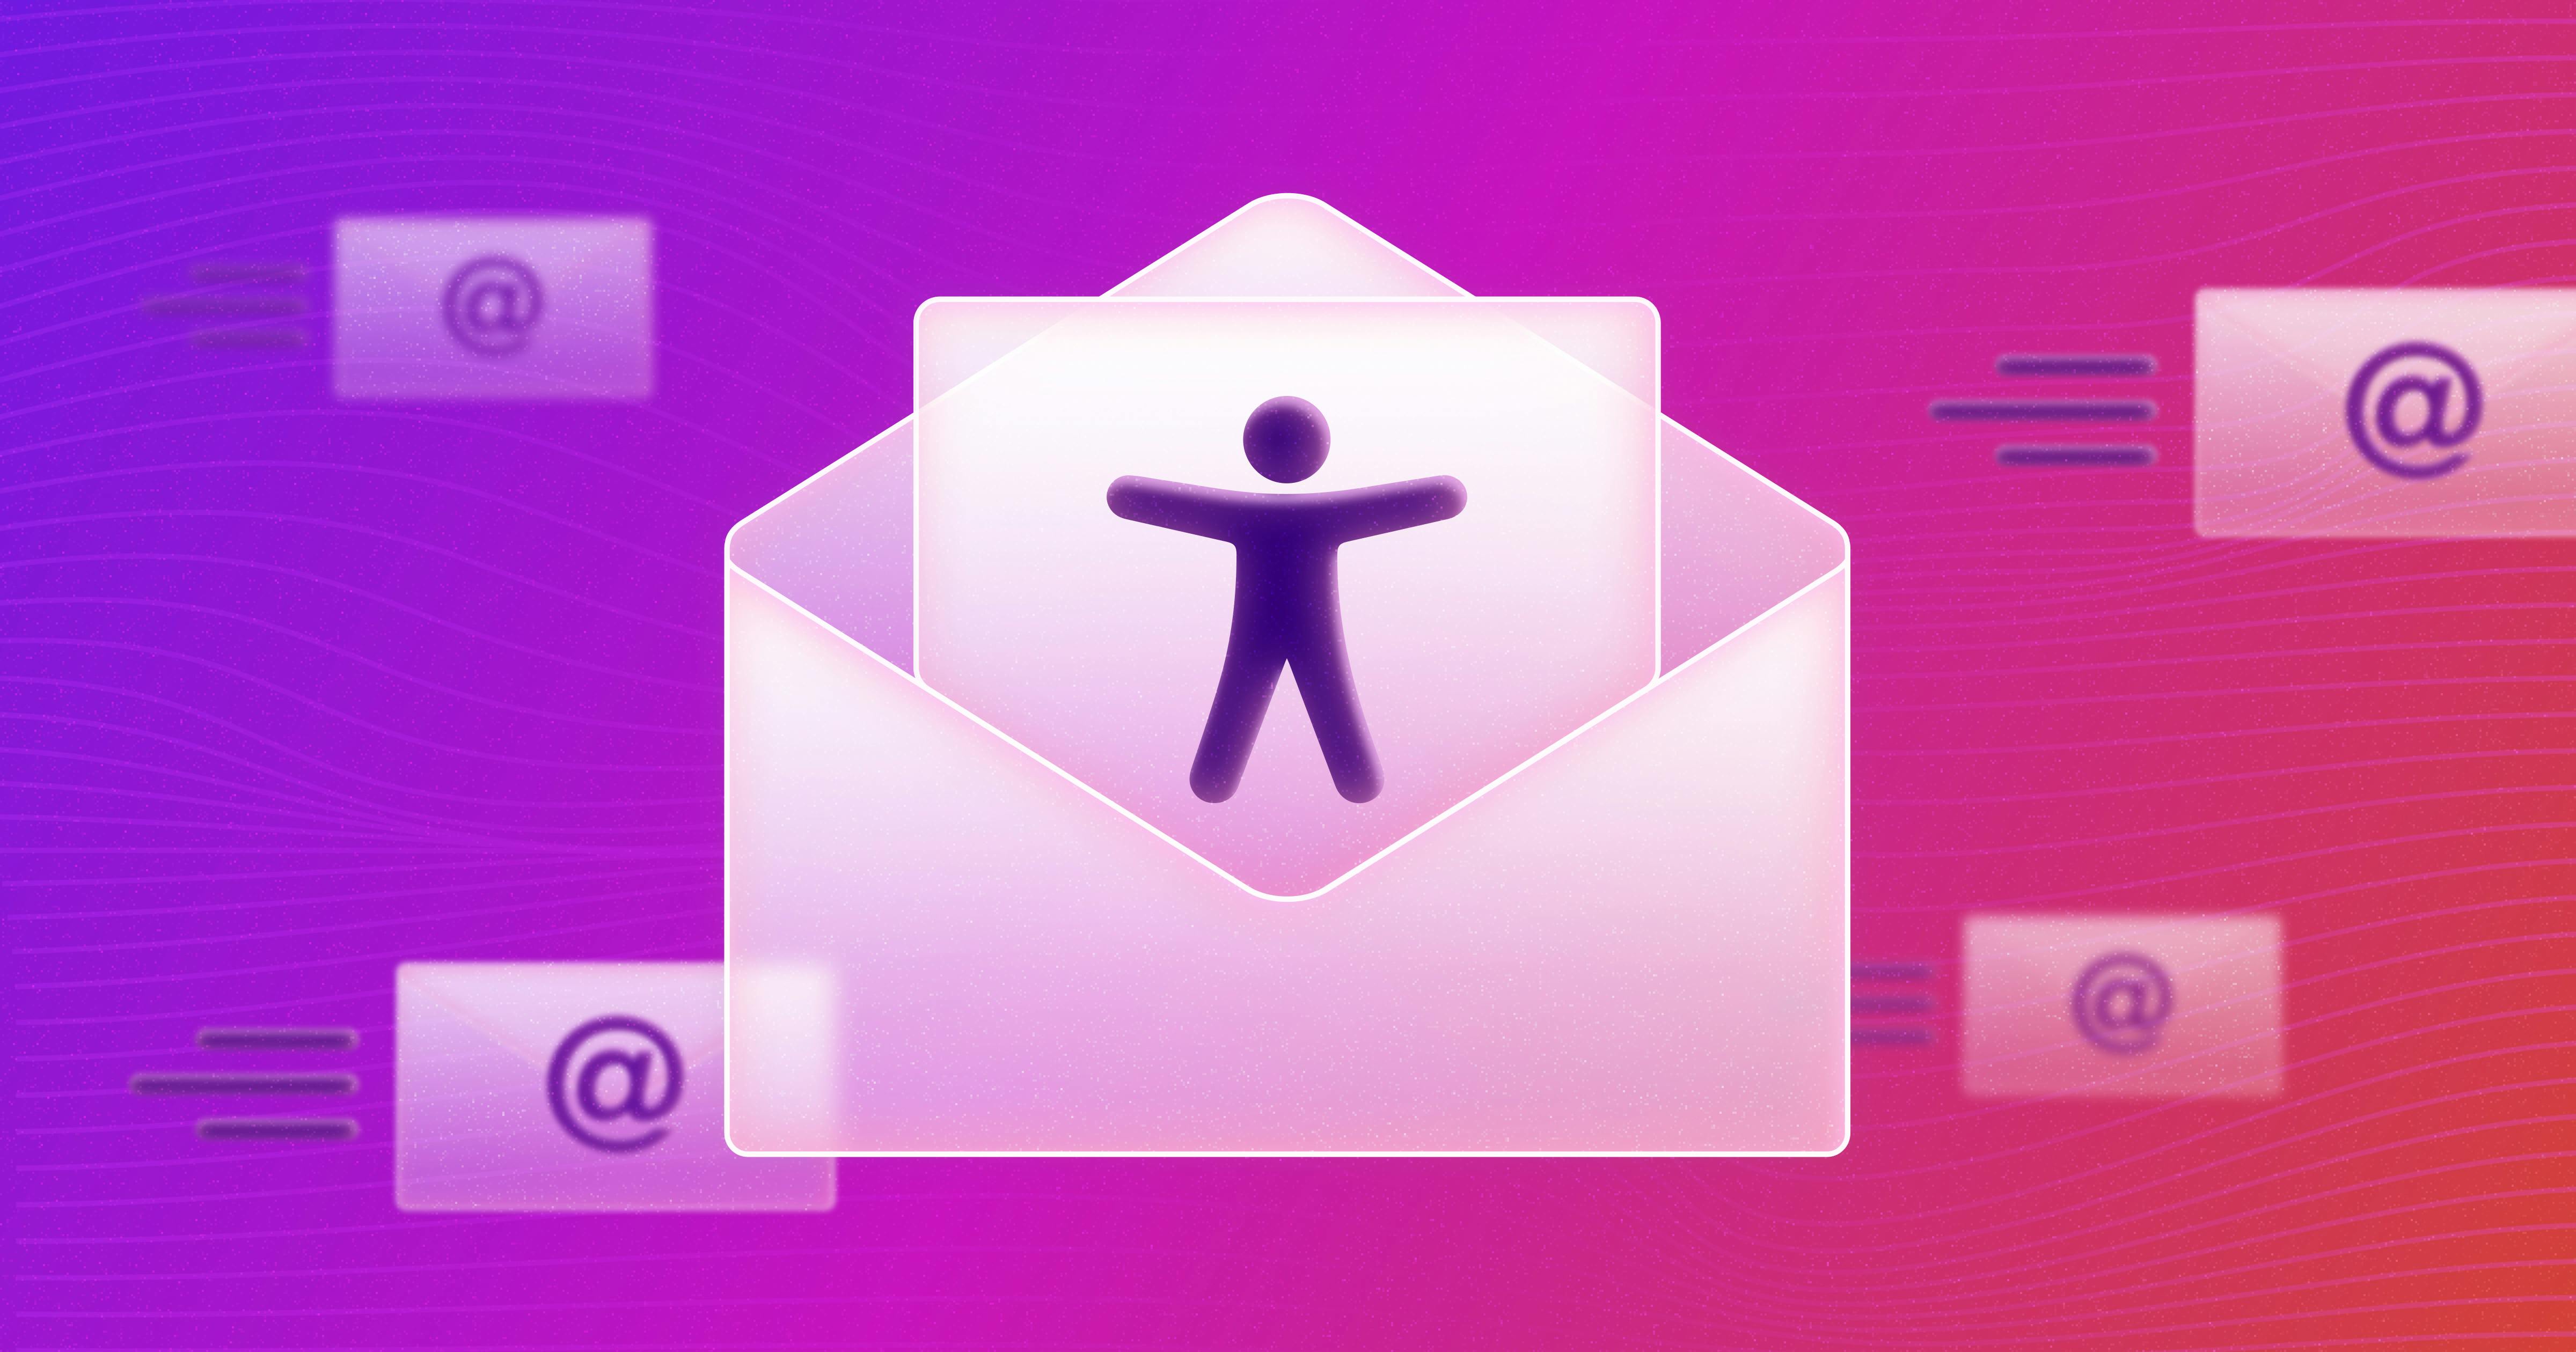 An accessibility icon inside a stylized envelope, surrounded by envelopes with at sign icons that represent emails being delivered.